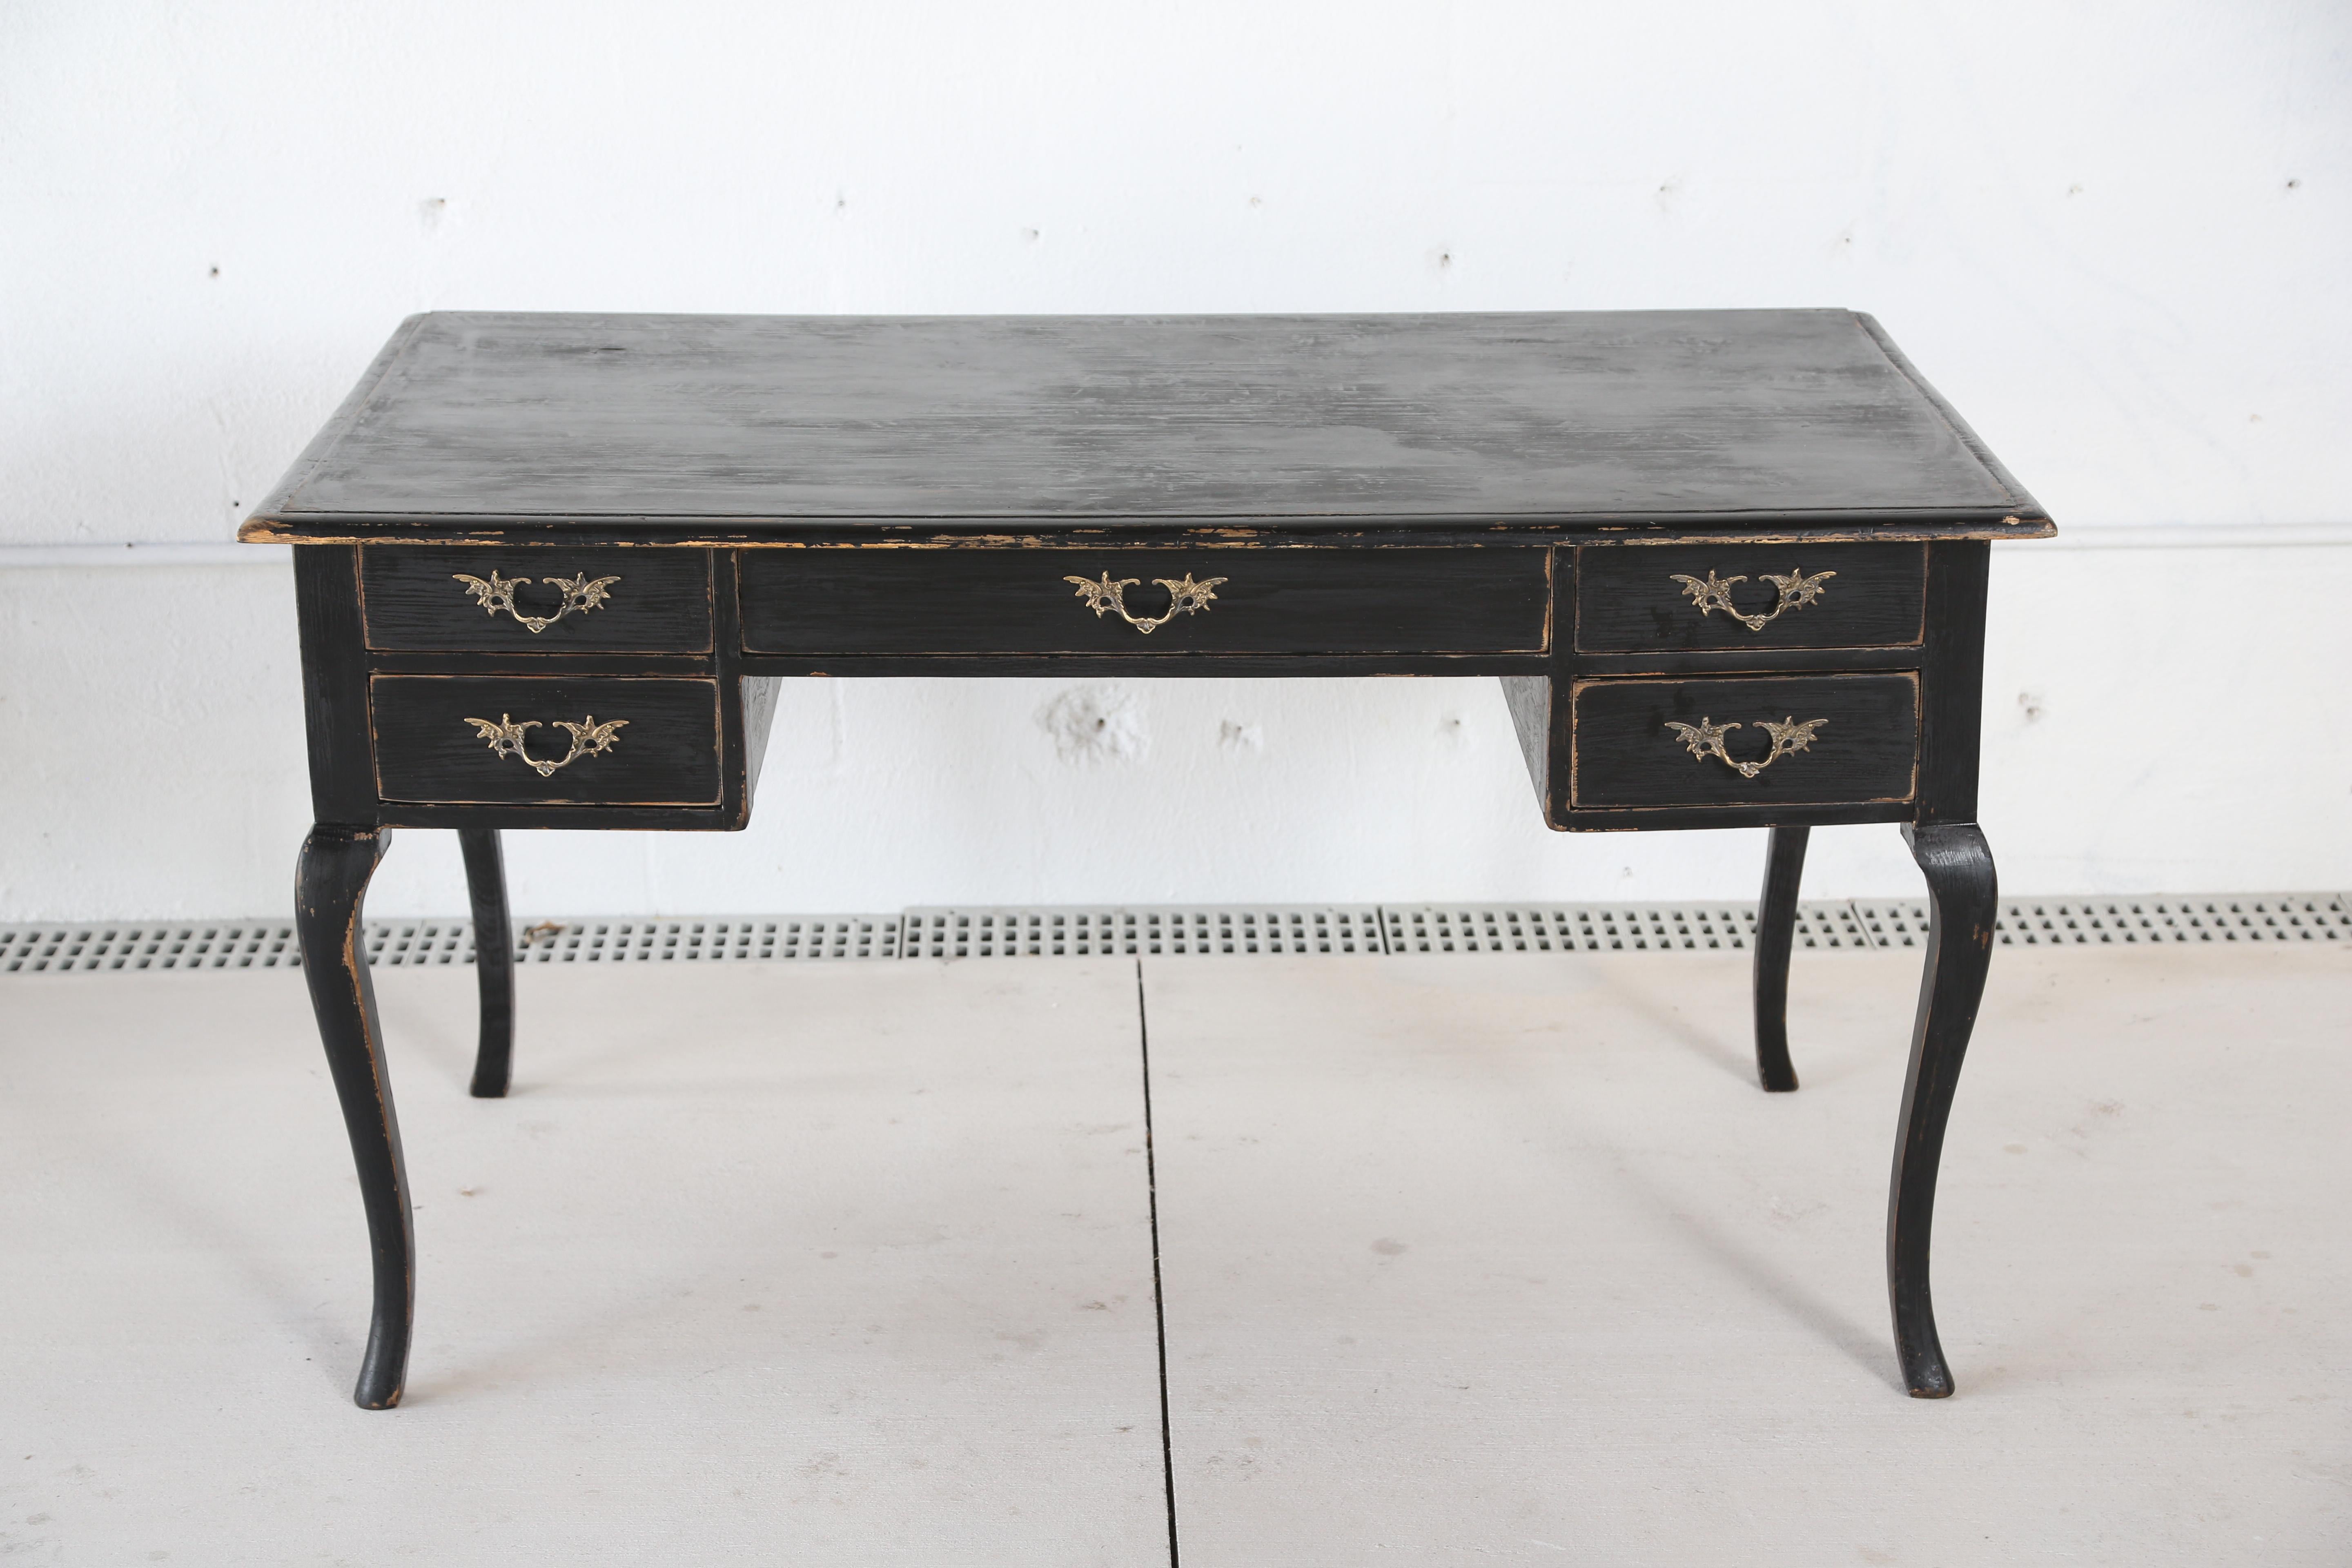 Antique Swedish Rococo Style writing desk in Black distressed paint finish, cabriole legs, five drawers with lovely carved brass hardware, simple half round top edge.

H 29